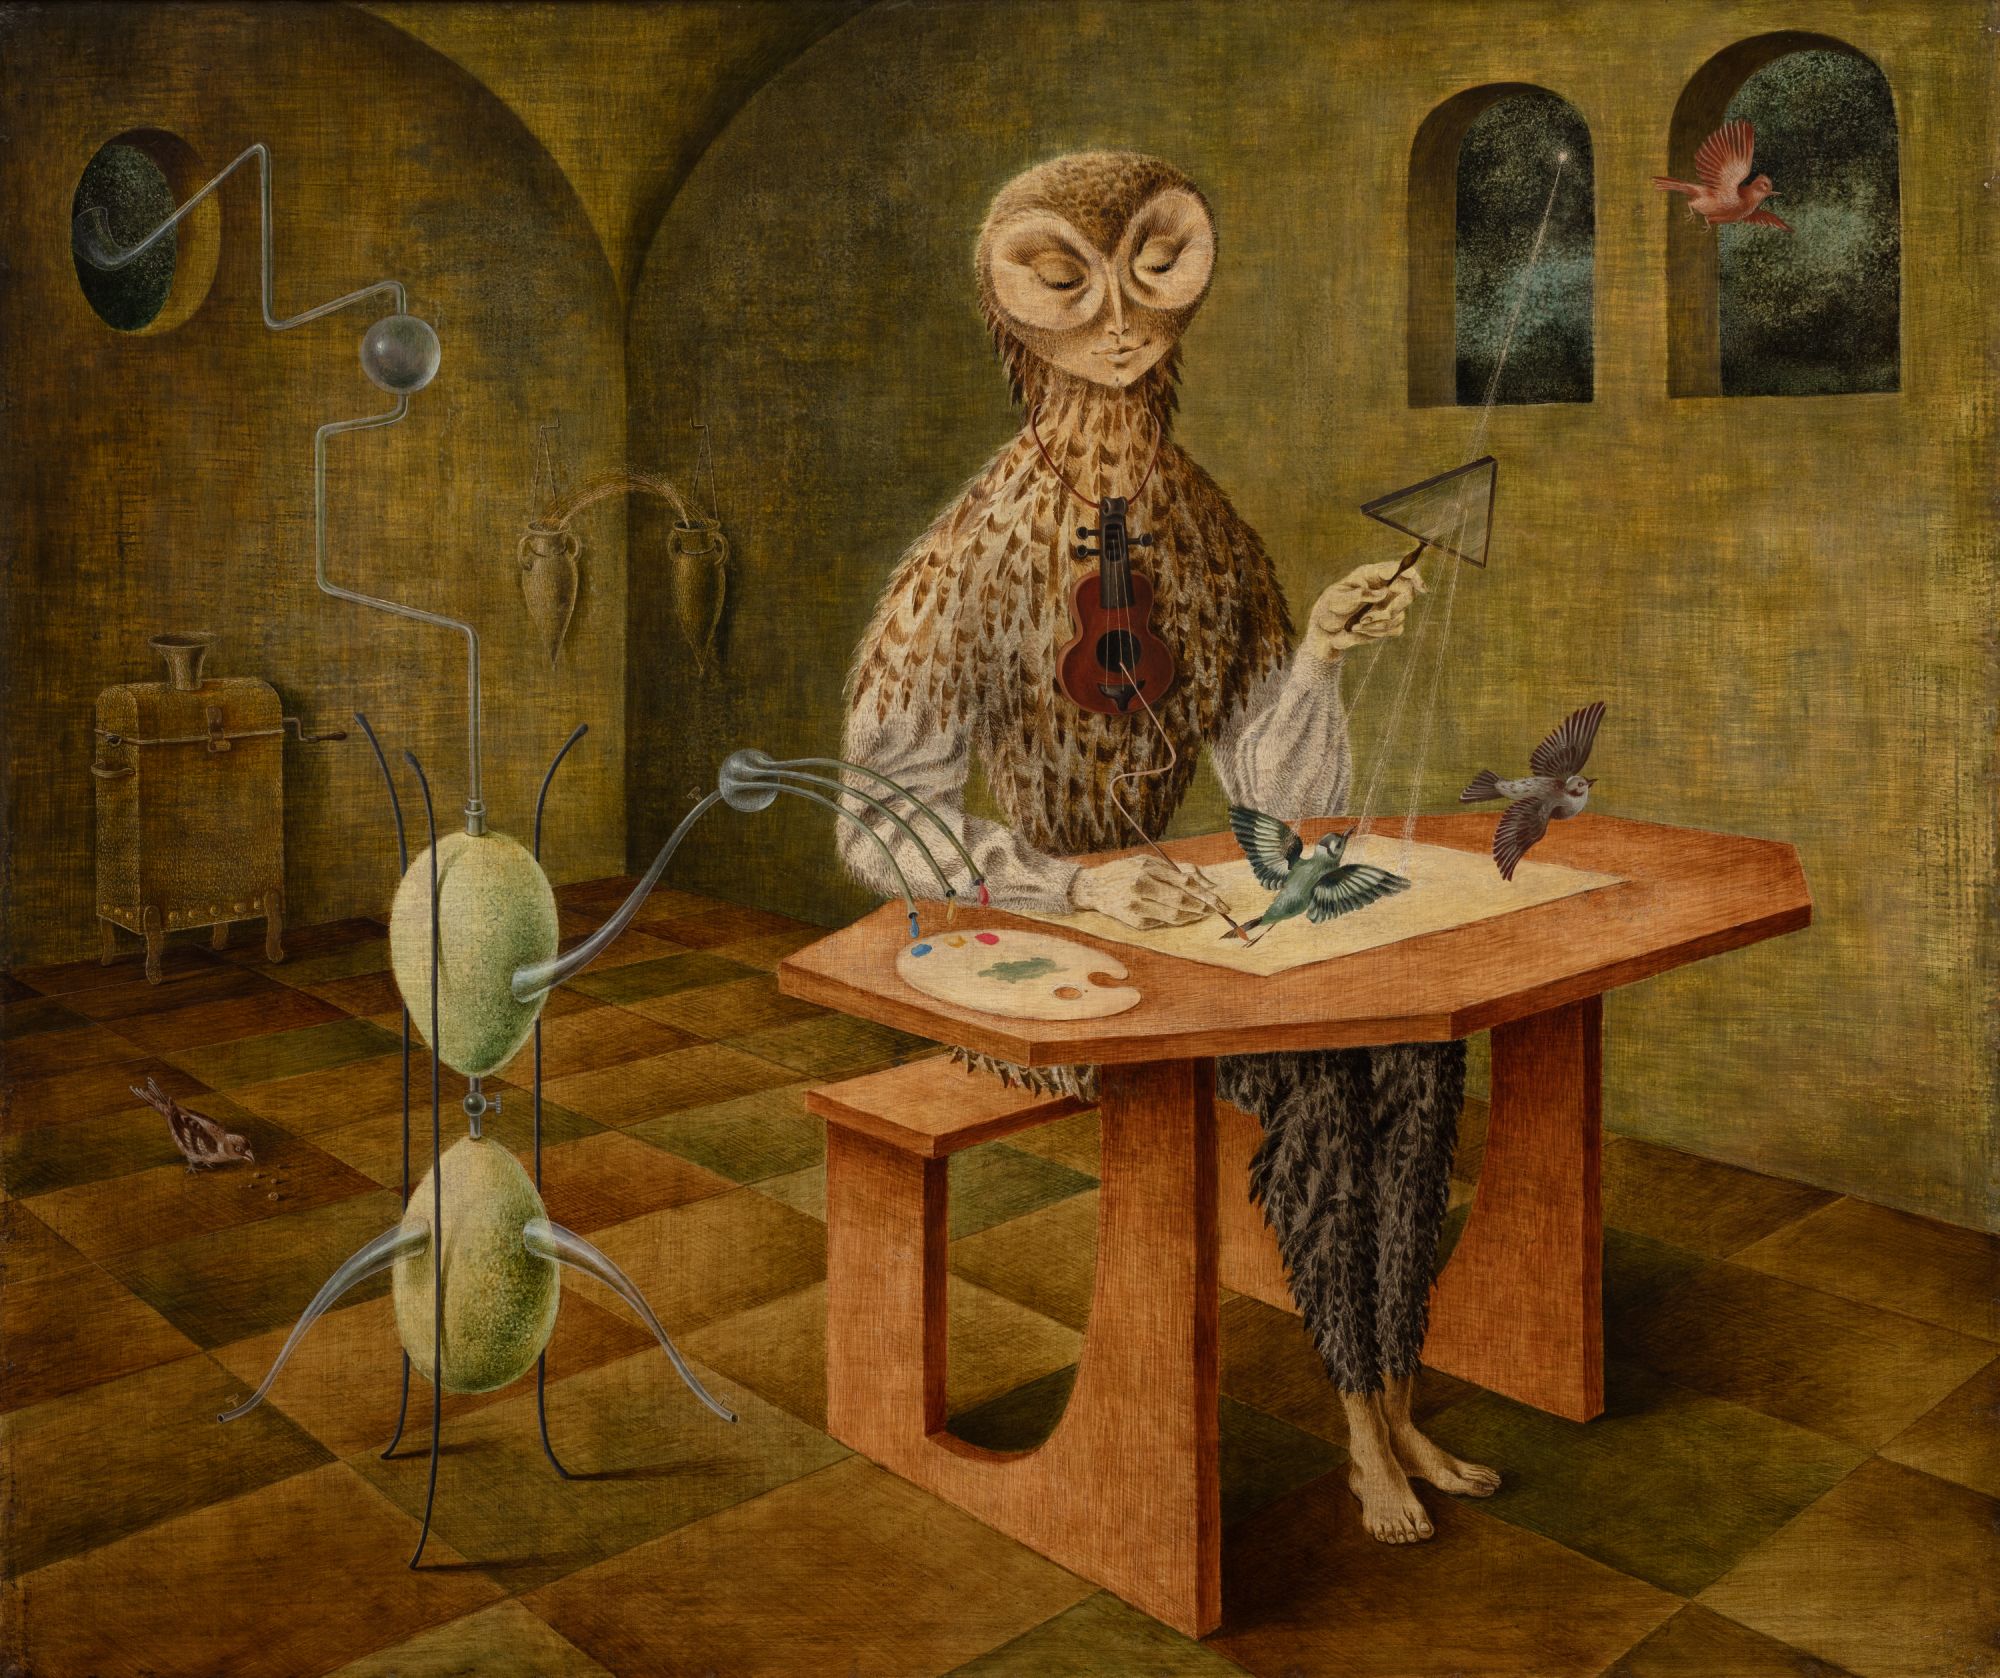 Why Remedios Varo, one of the ‘three witches’ of surrealism, continues